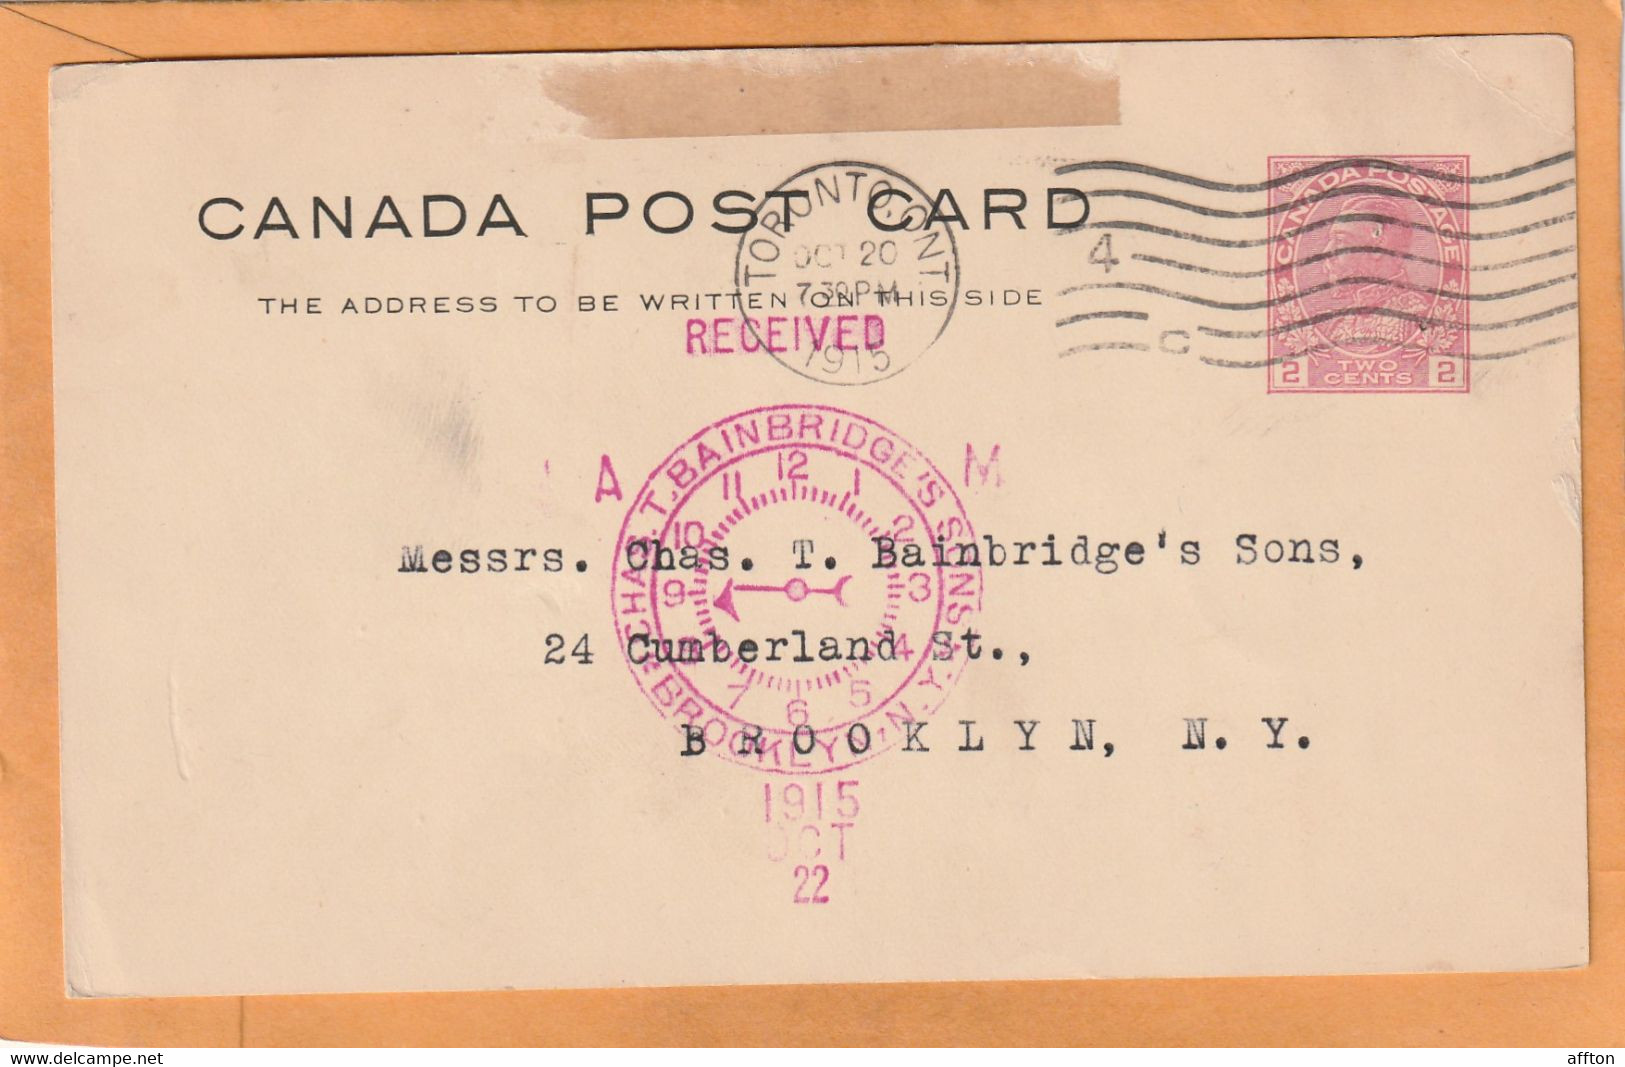 Canada Old Card Mailed - 1903-1954 Kings